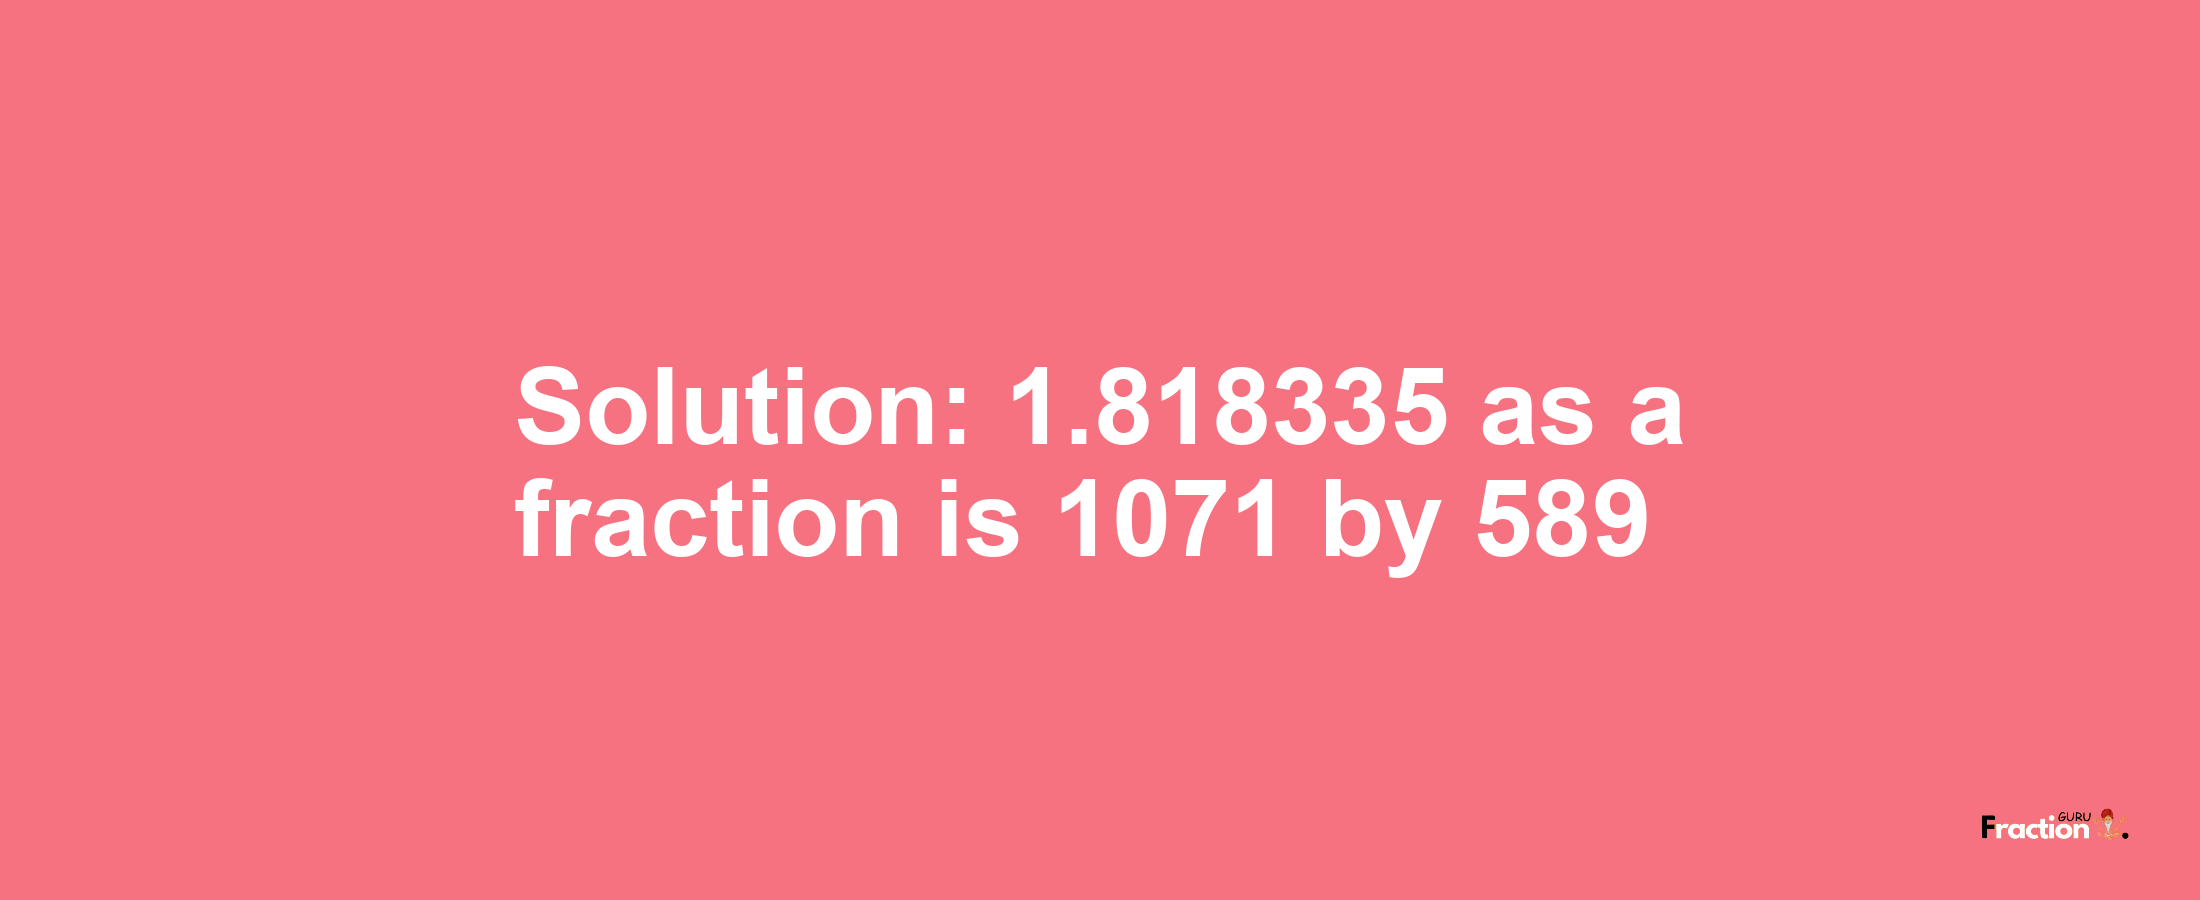 Solution:1.818335 as a fraction is 1071/589